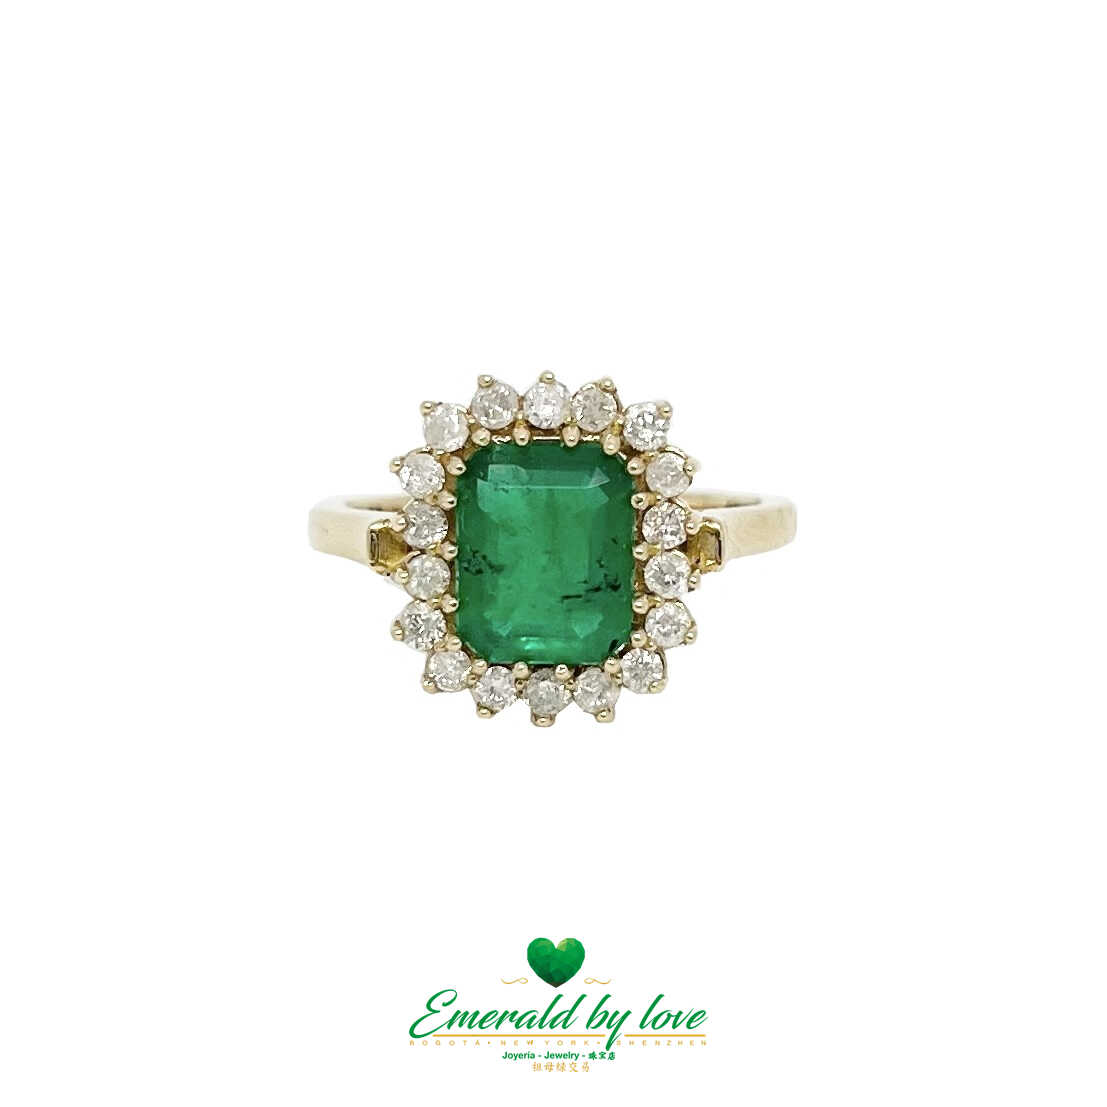 Marquise-Cut Emerald Ring with Central Gemstone and Diamond Halo